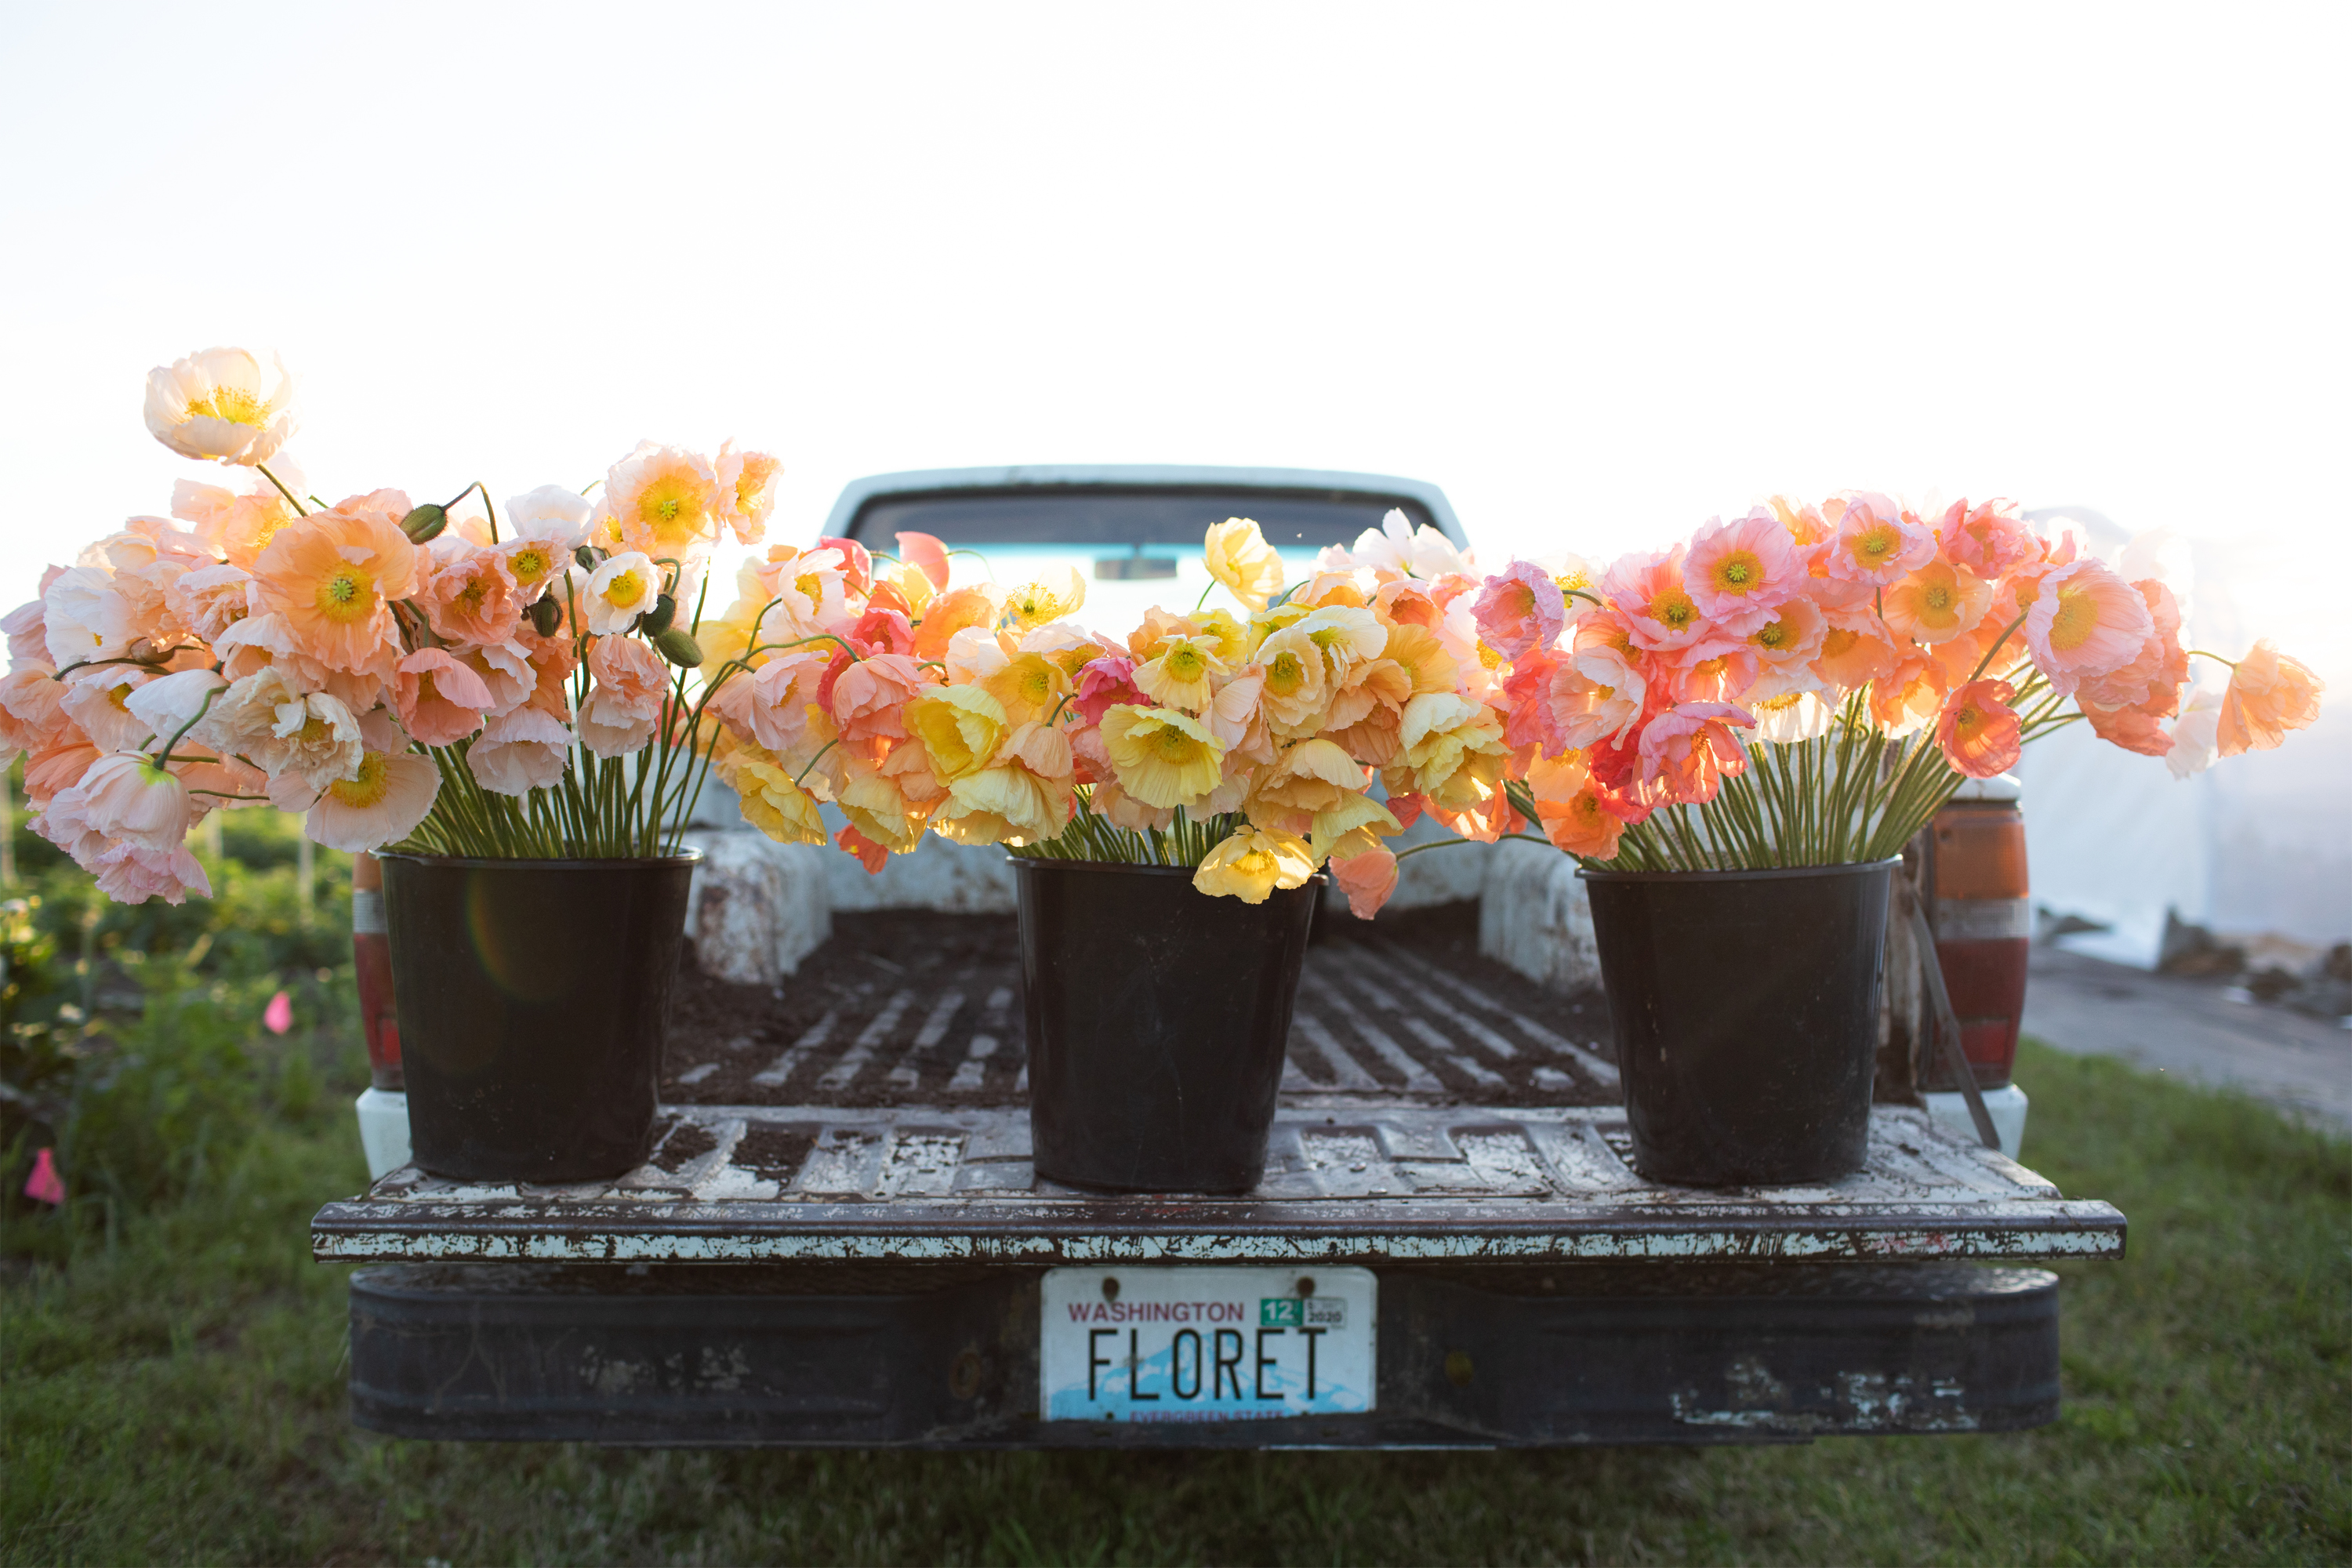 Buckets of Iceland Poppies on the Floret truck bed